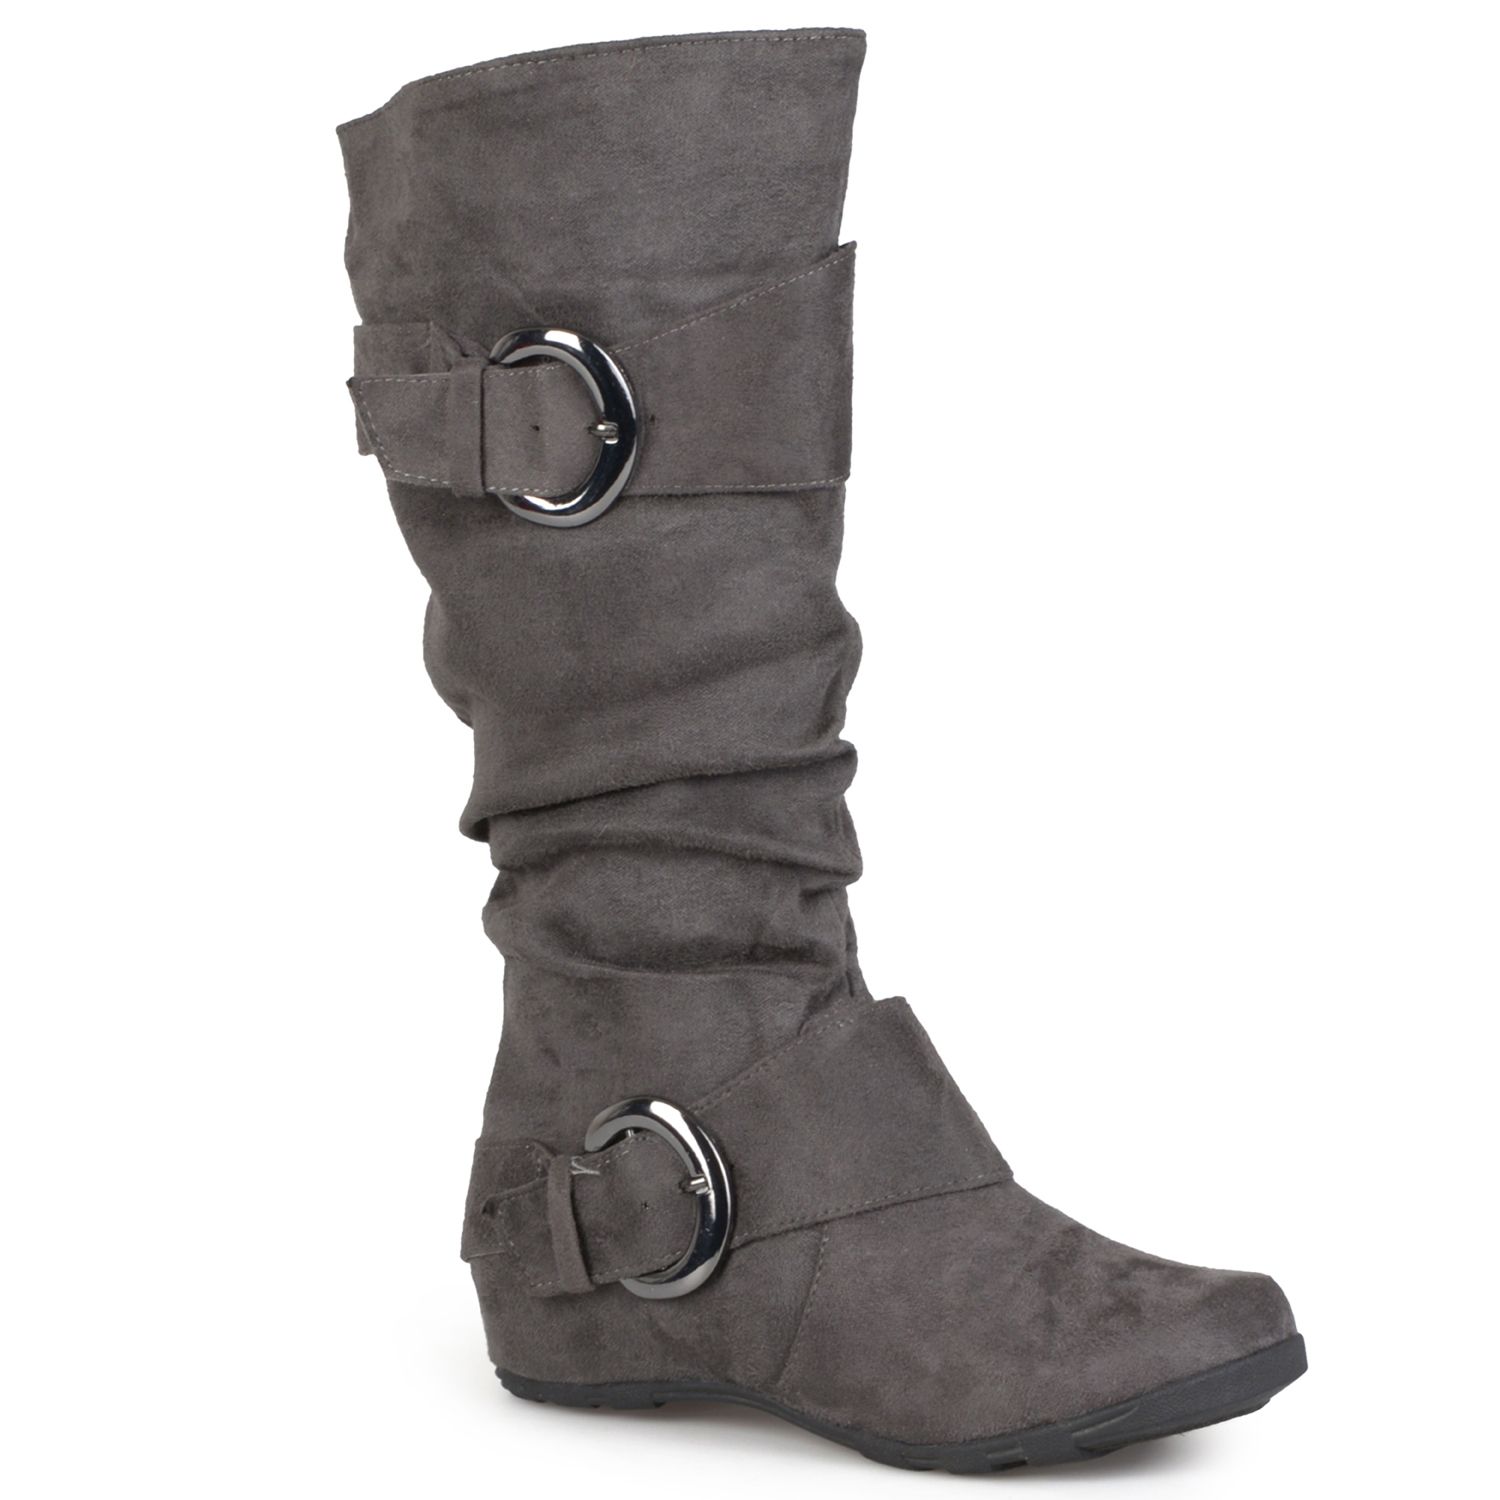 Womens Grey Wide Calf Boots - Shoes 